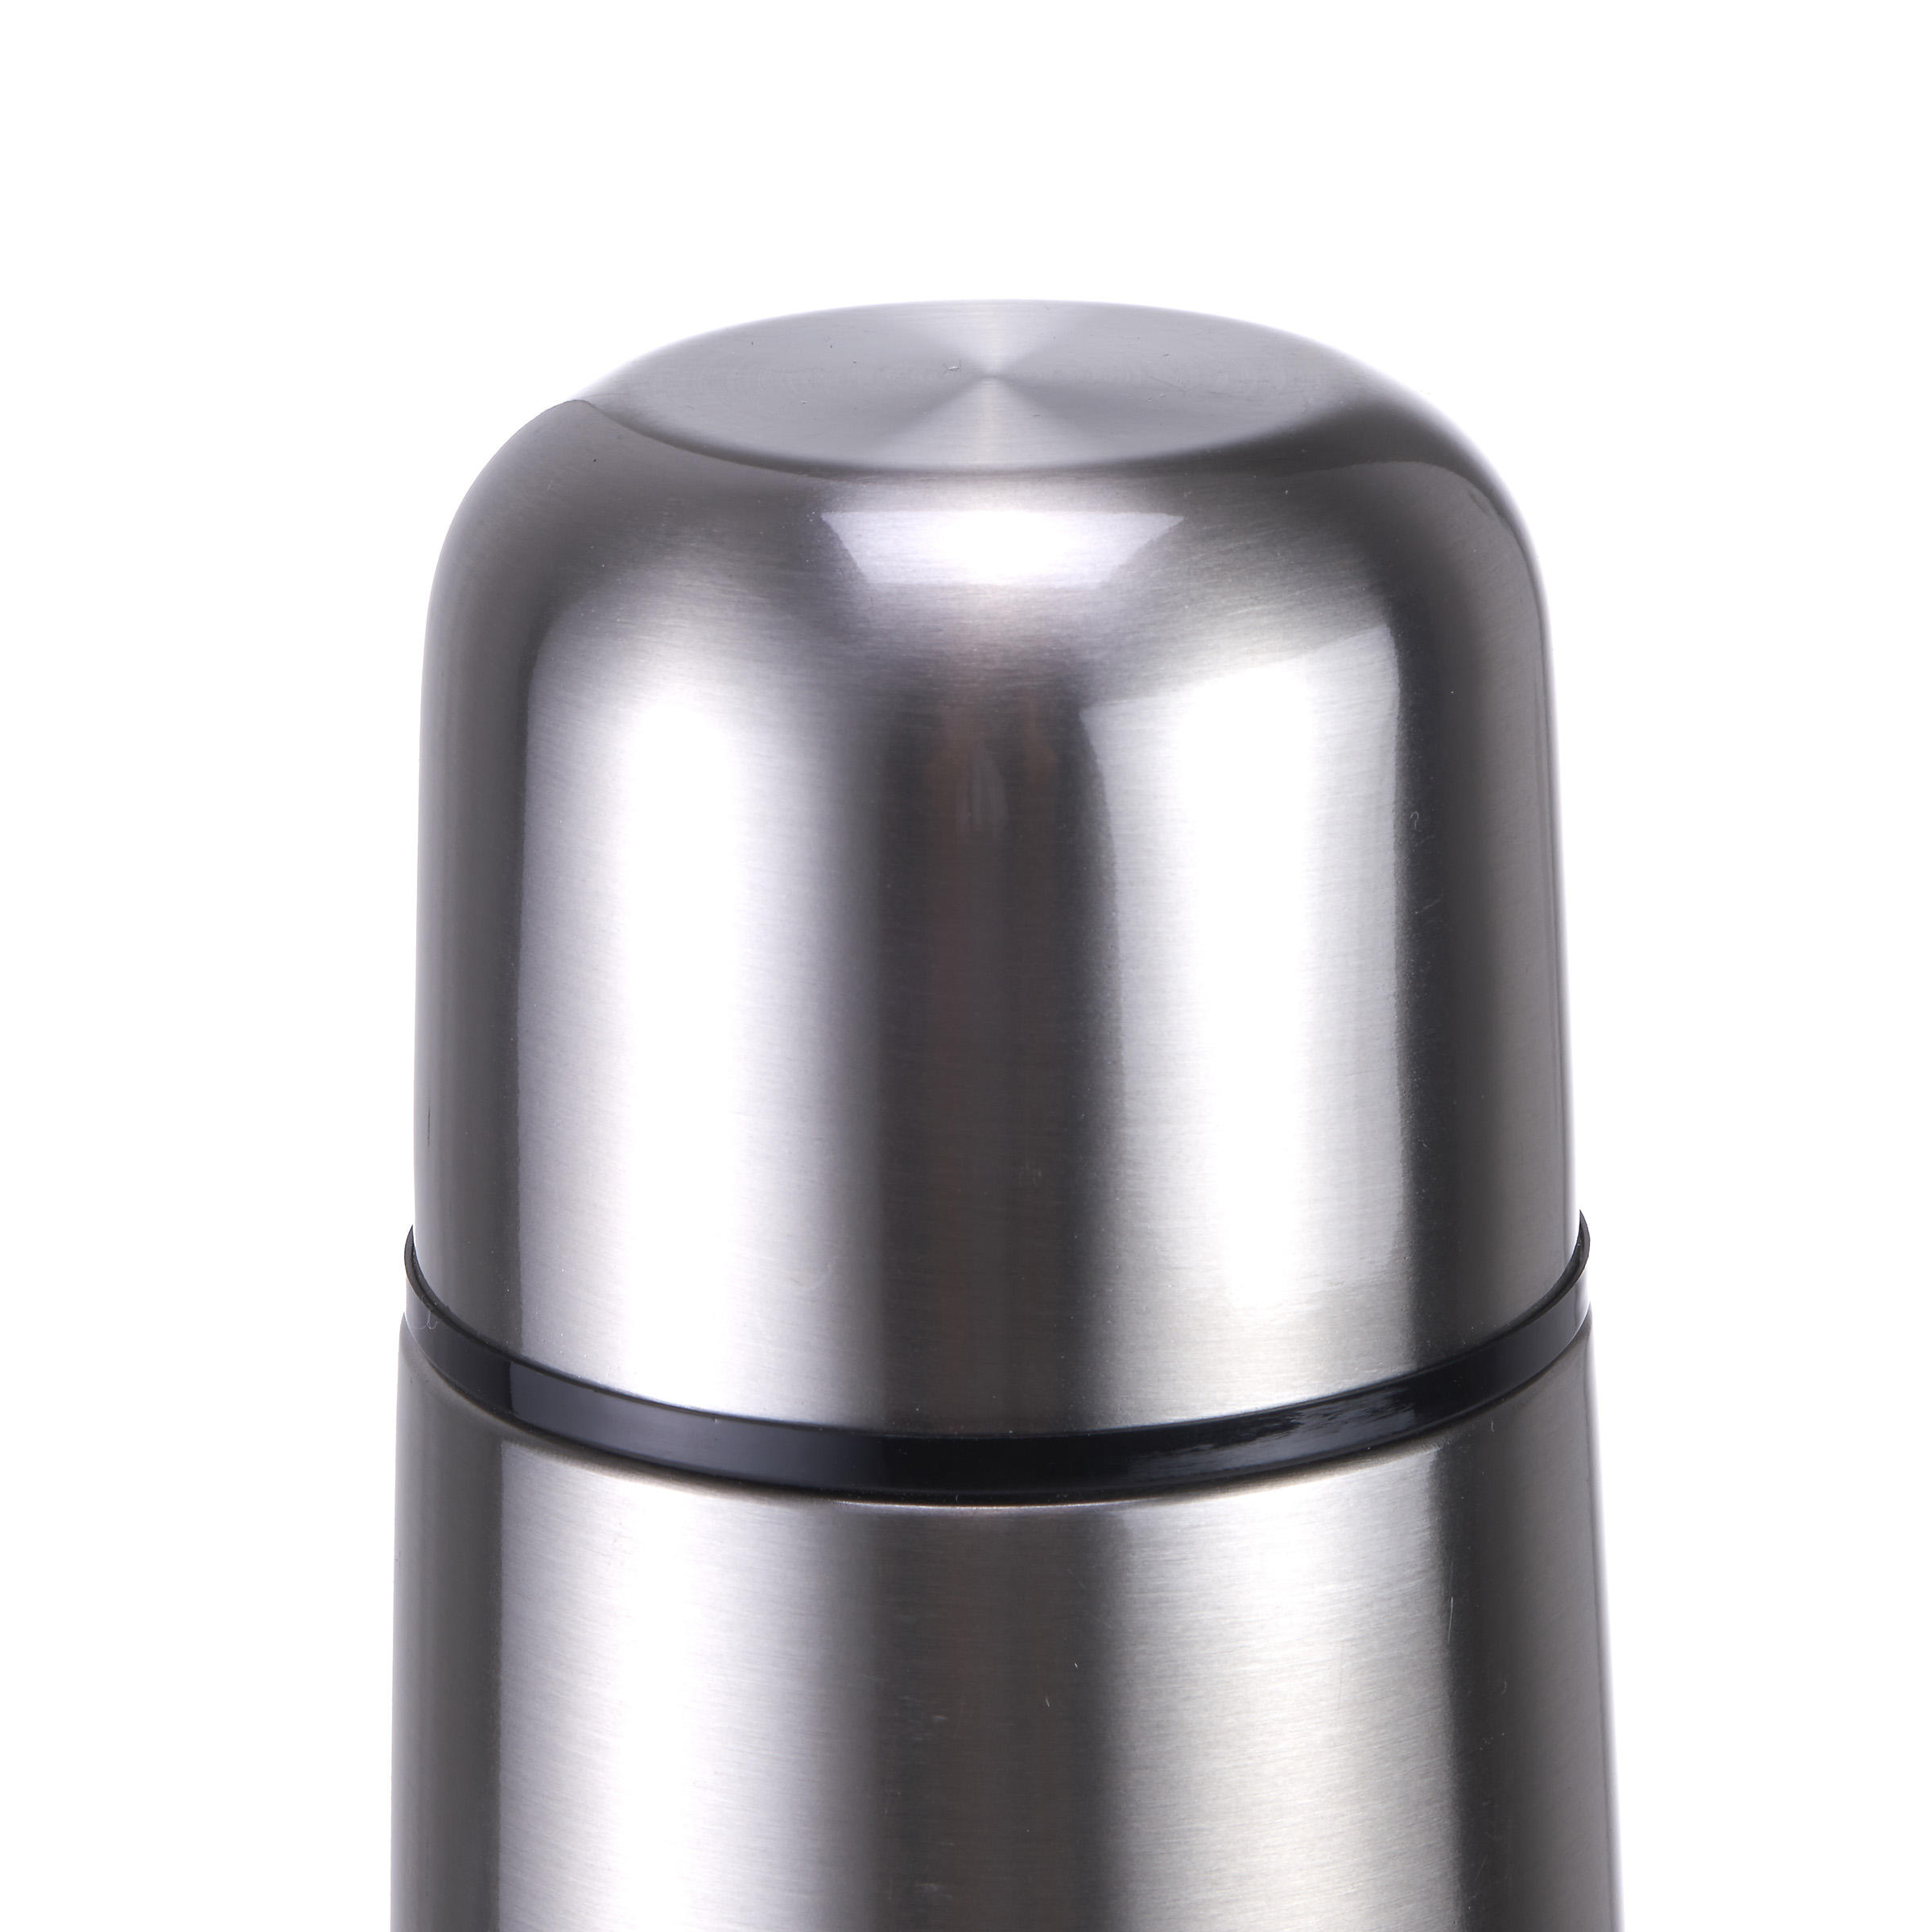 1 L stainless steel isothermal water bottle with cup for hiking - Silver 11/11